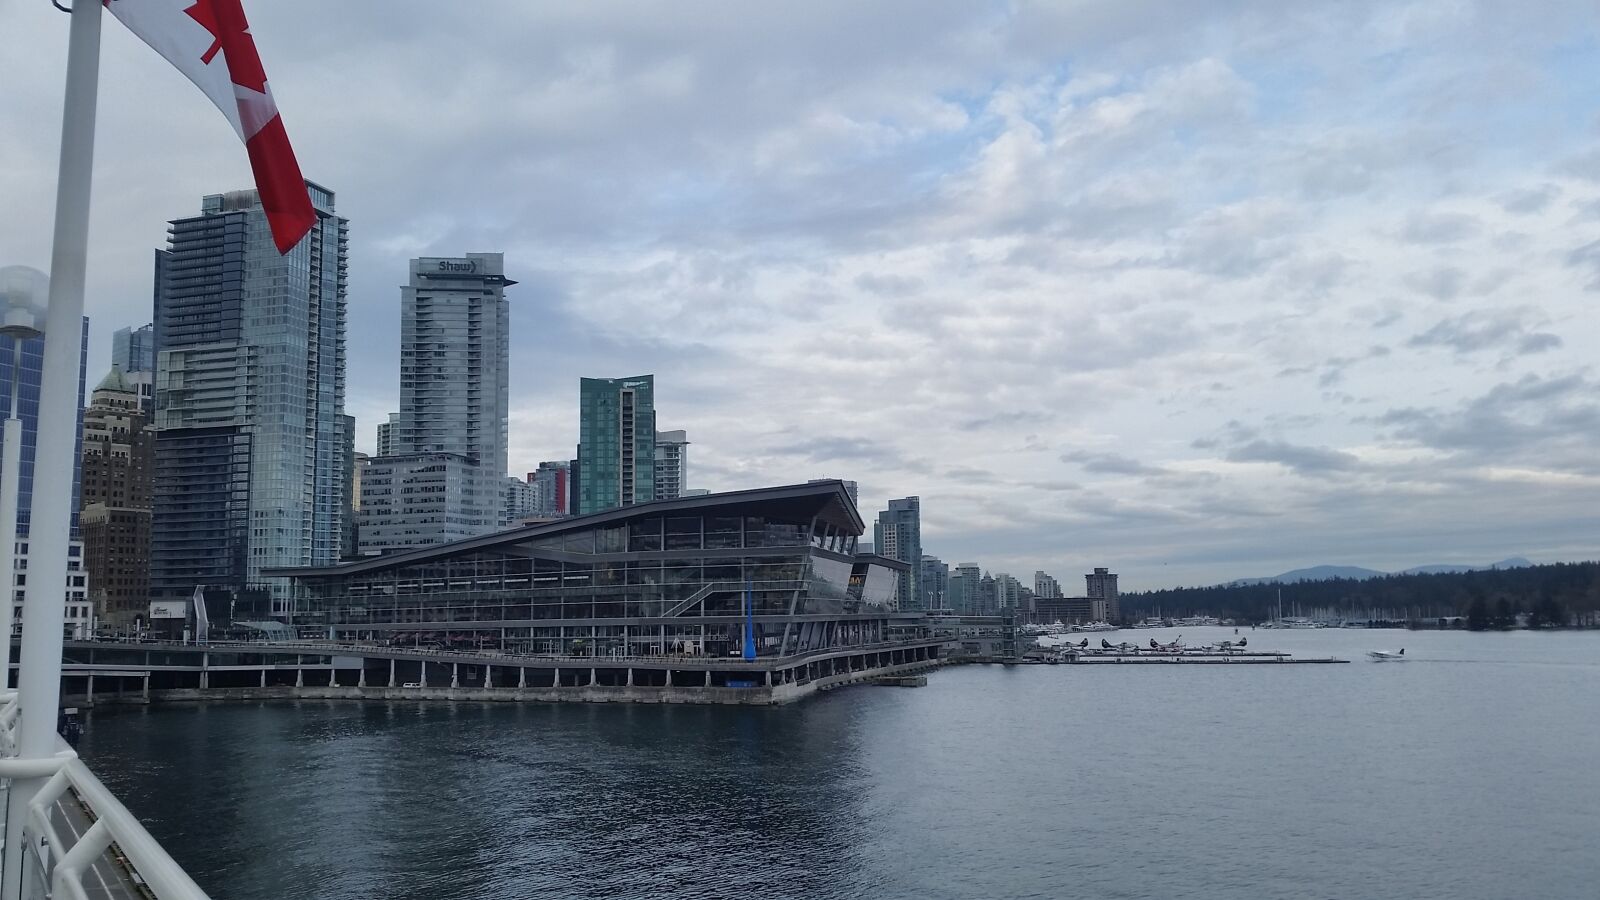 Samsung Galaxy S5 sample photo. Canada place, vancouver, canada photography